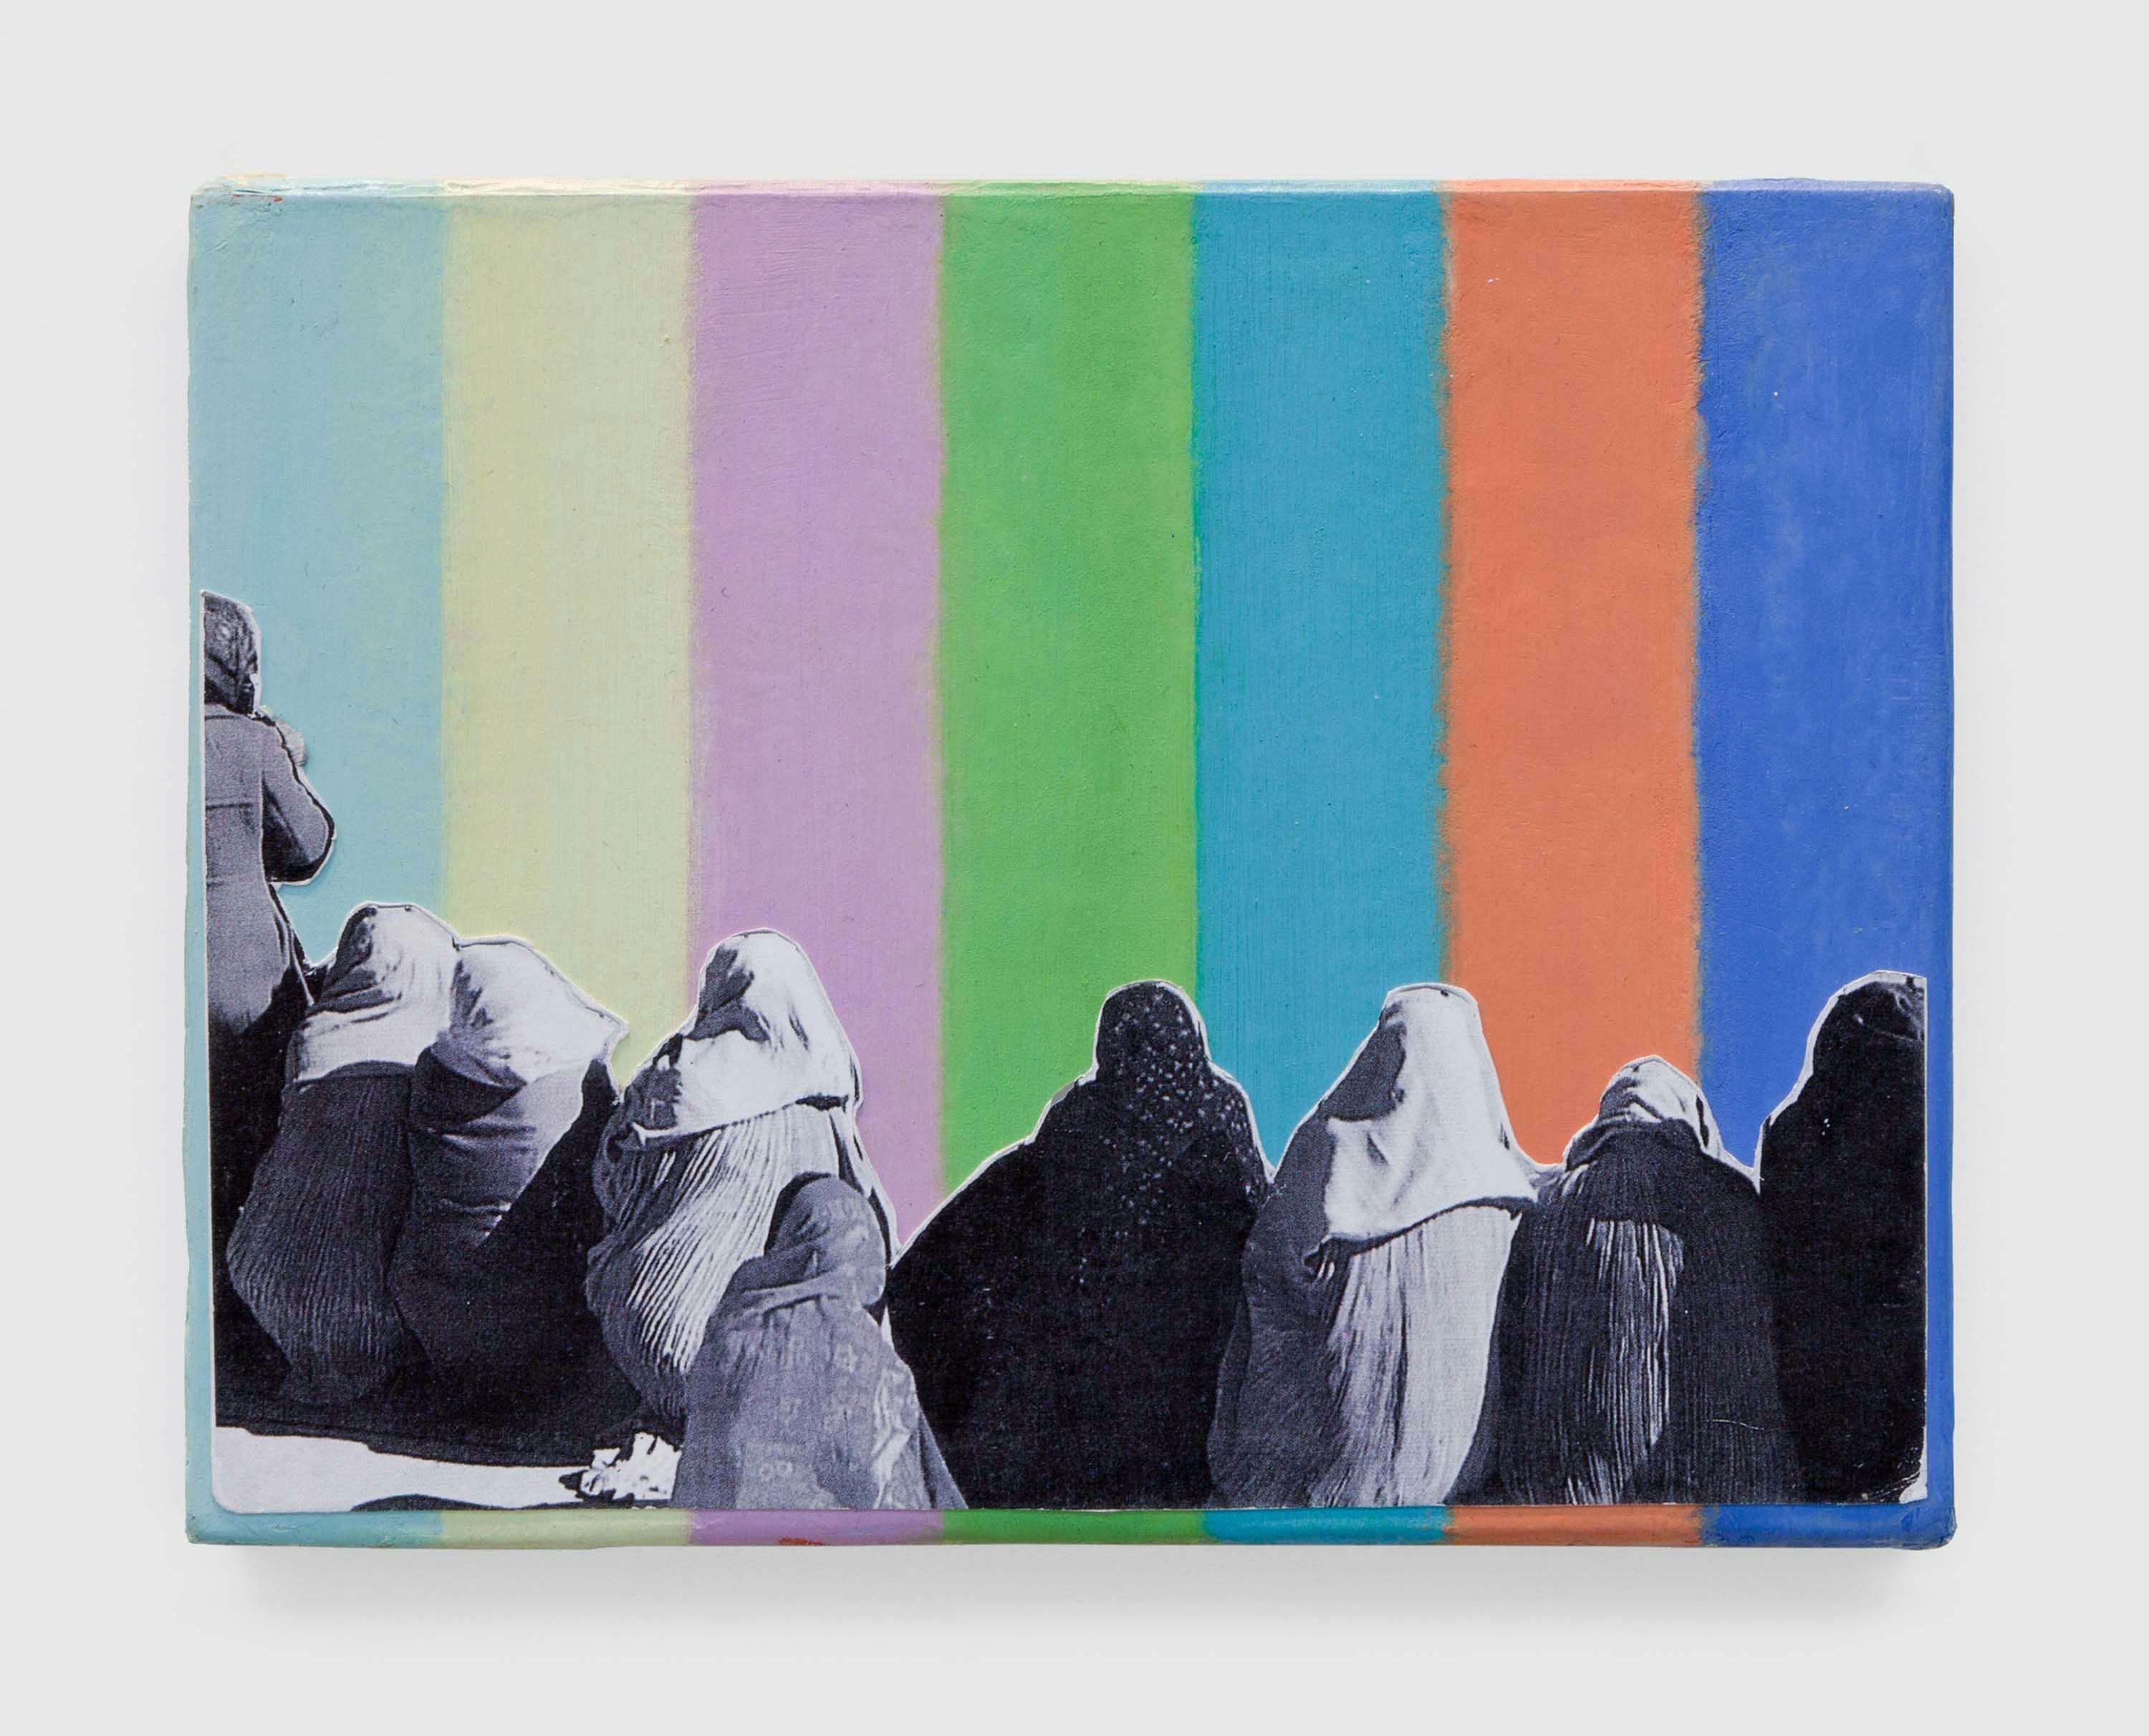 A painting by Francis Alÿs, called Untitled (color bar), 2011 to 2012.